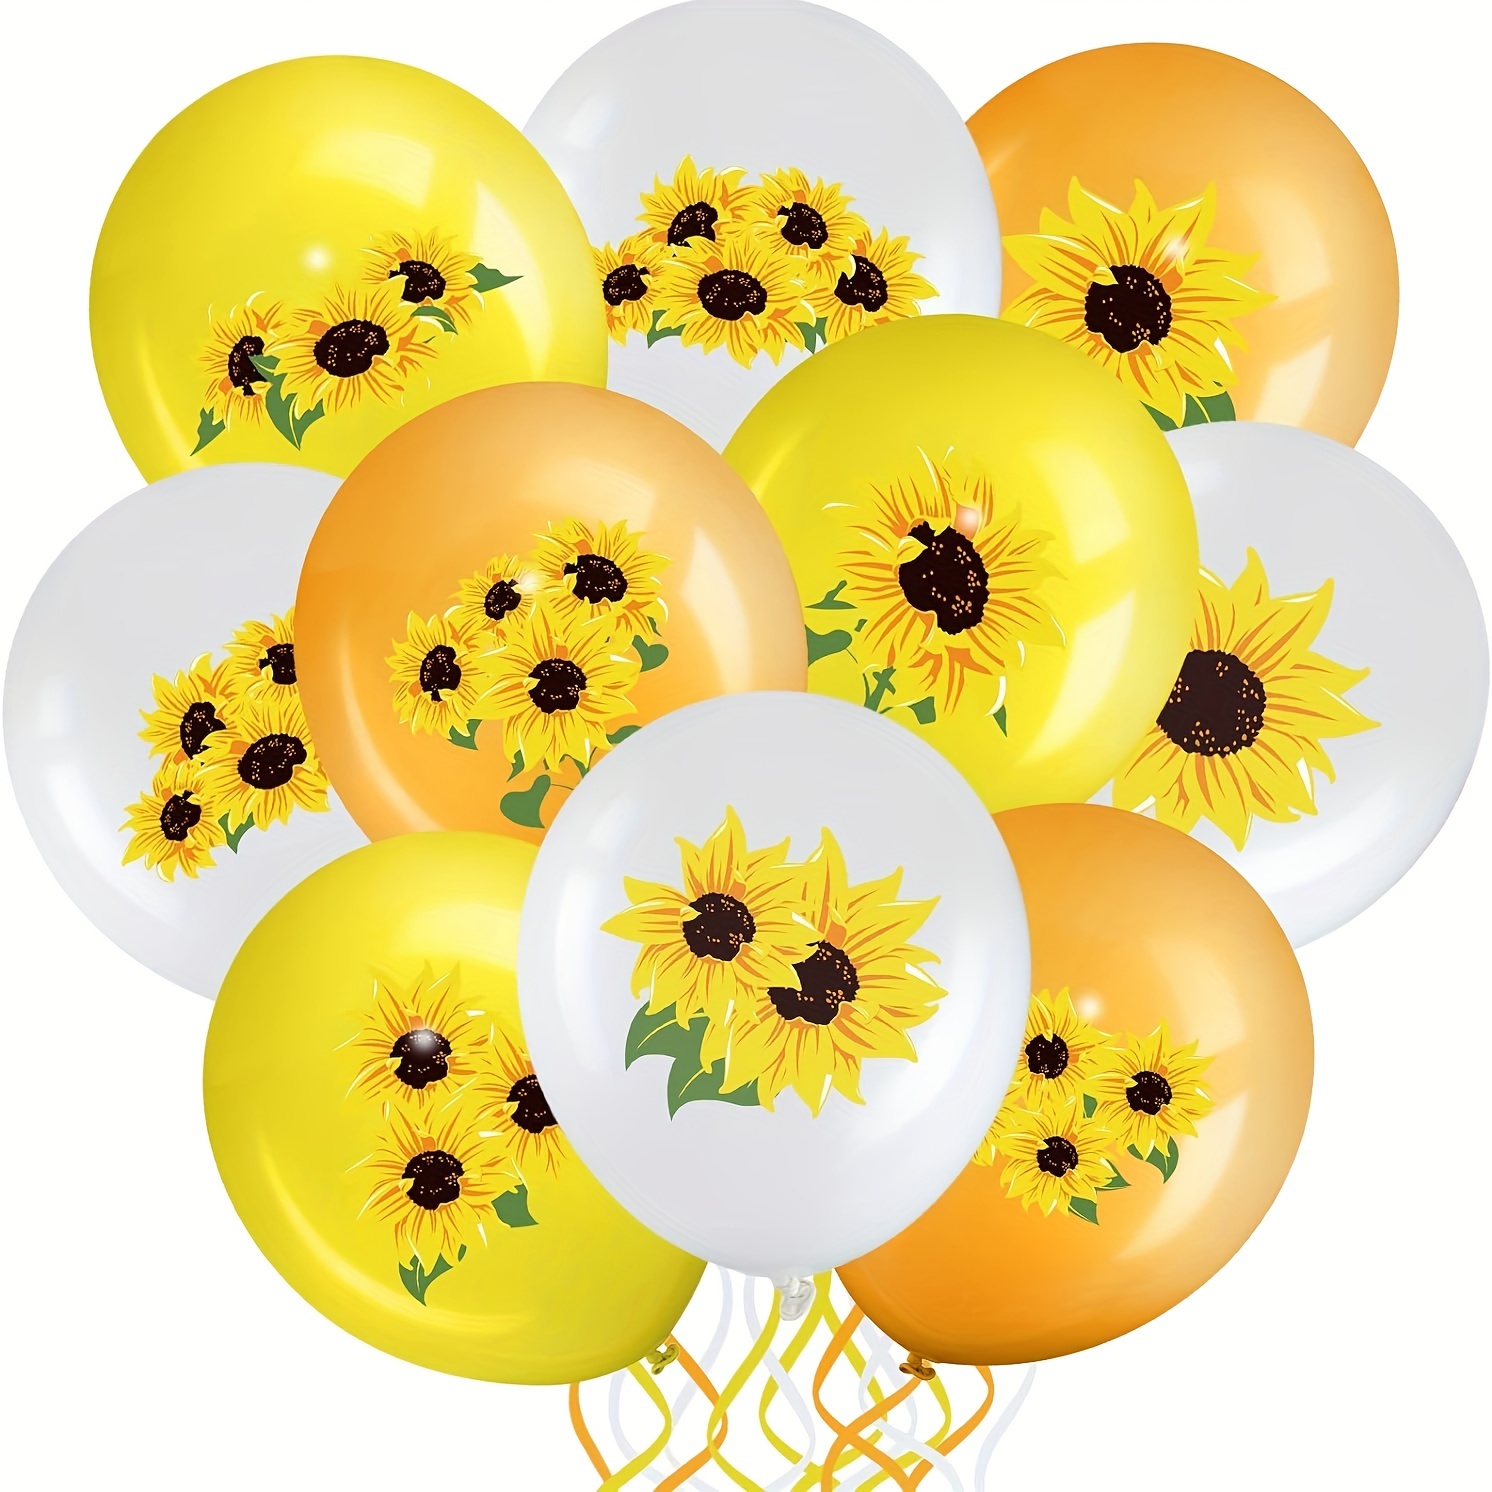 

20 Pcs Sunflower Party Decoration Balloons, Mixed Color Latex Sunflower Themed Balloons For Birthday, Wedding, Summer Celebrations - 12-inch Oval Shaped Emulsion Balloons For Ages 14+